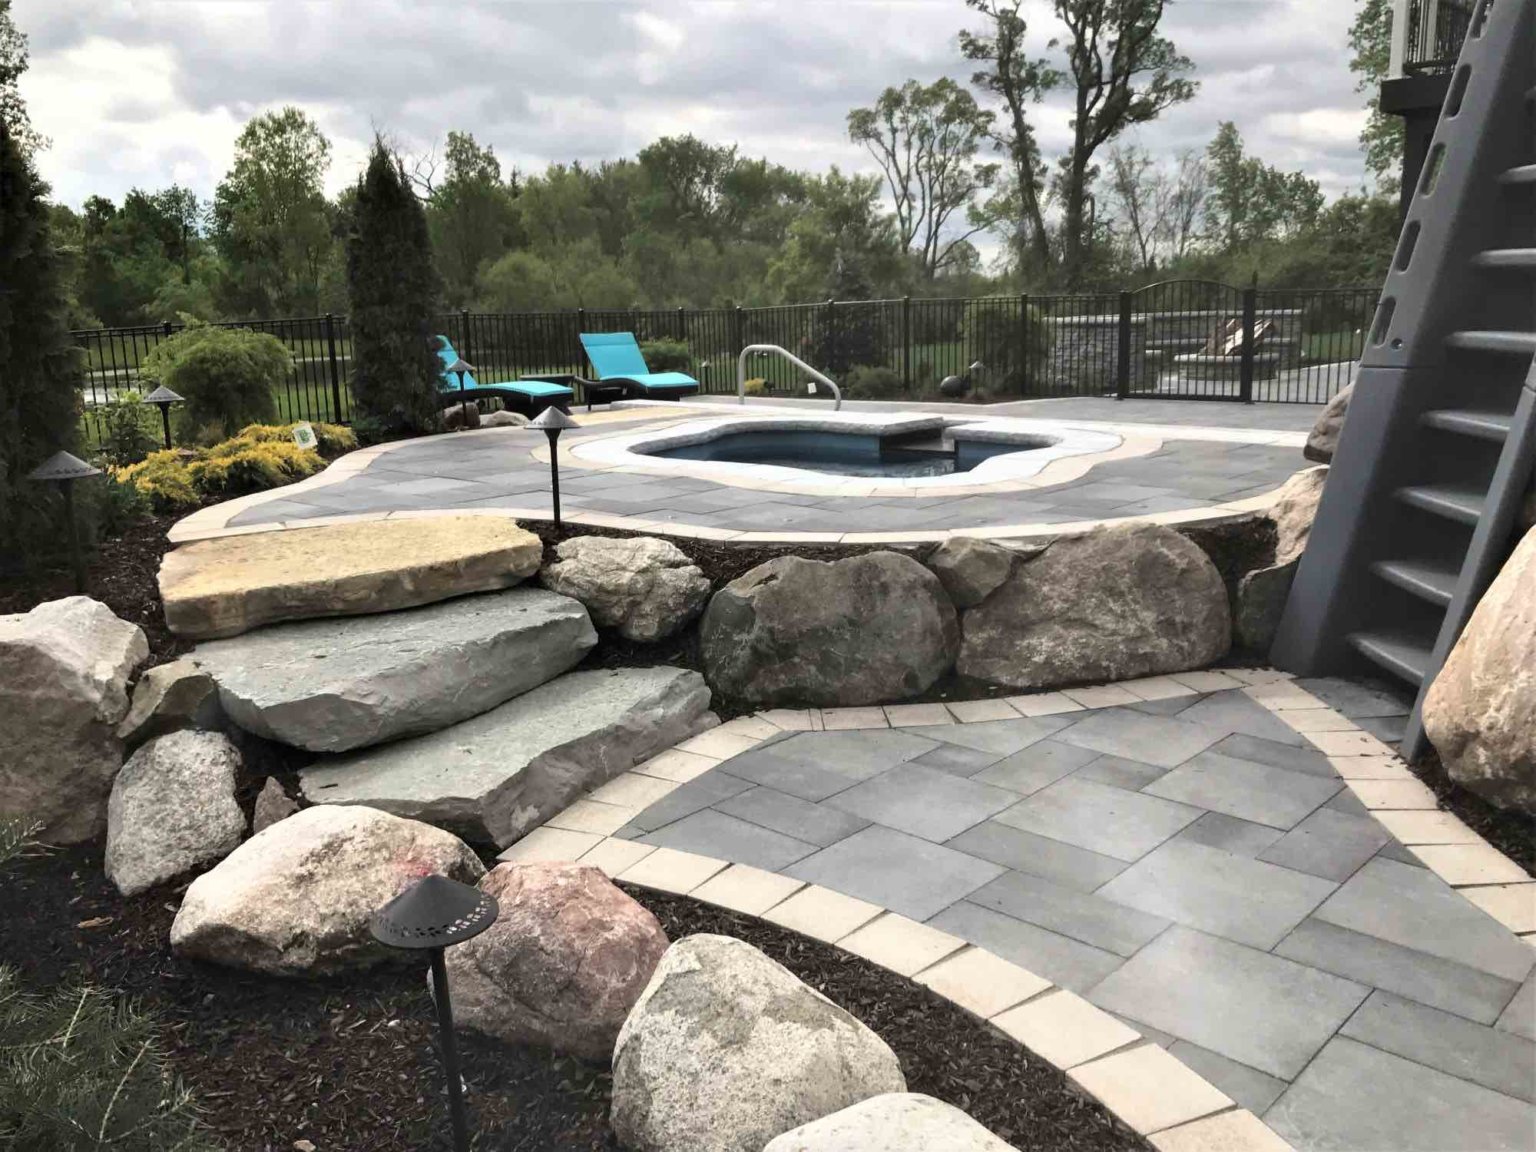 luxurious inground pool contractor in Northville, MI Pool and cascade spa michigan Outdoor living space Michigan Landscape Design Landscape Design Services in Michigan Professional Landscape Design Michigan Michigan Landscape Architects Best Landscape Designers in Michigan Michigan Residential Landscape Design Custom Landscape Design Michigan Michigan Garden Design